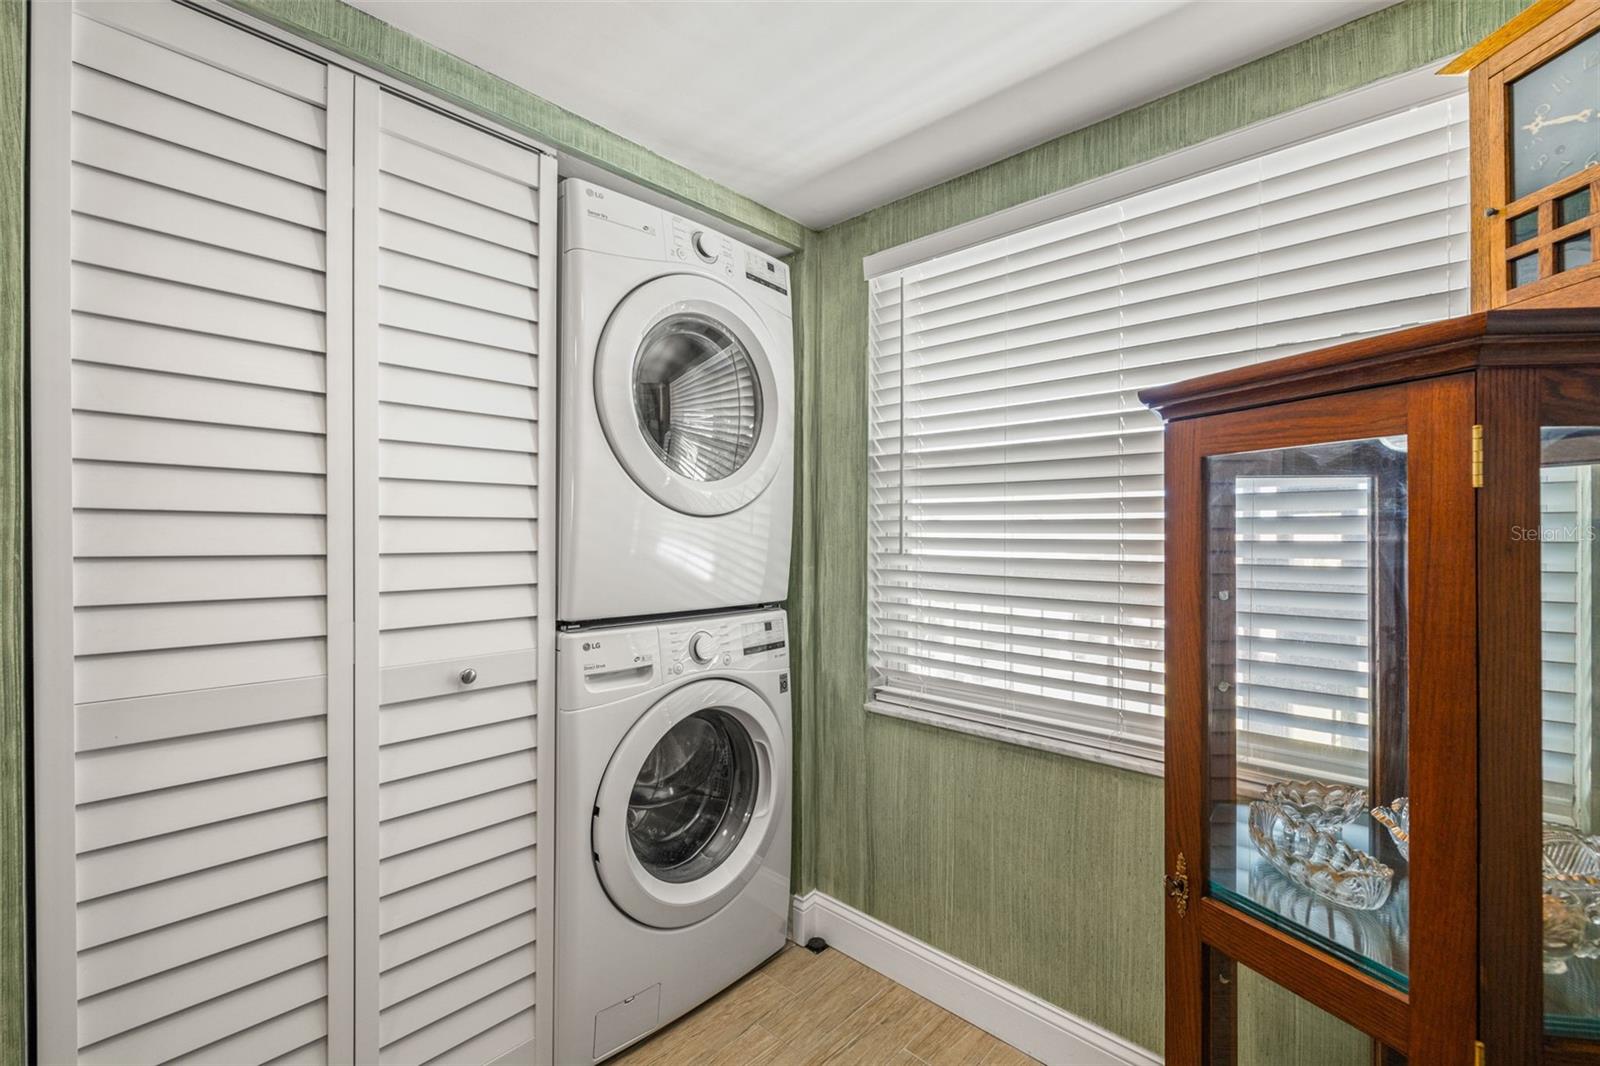 Full size washer & dryer conveniently located in the unit